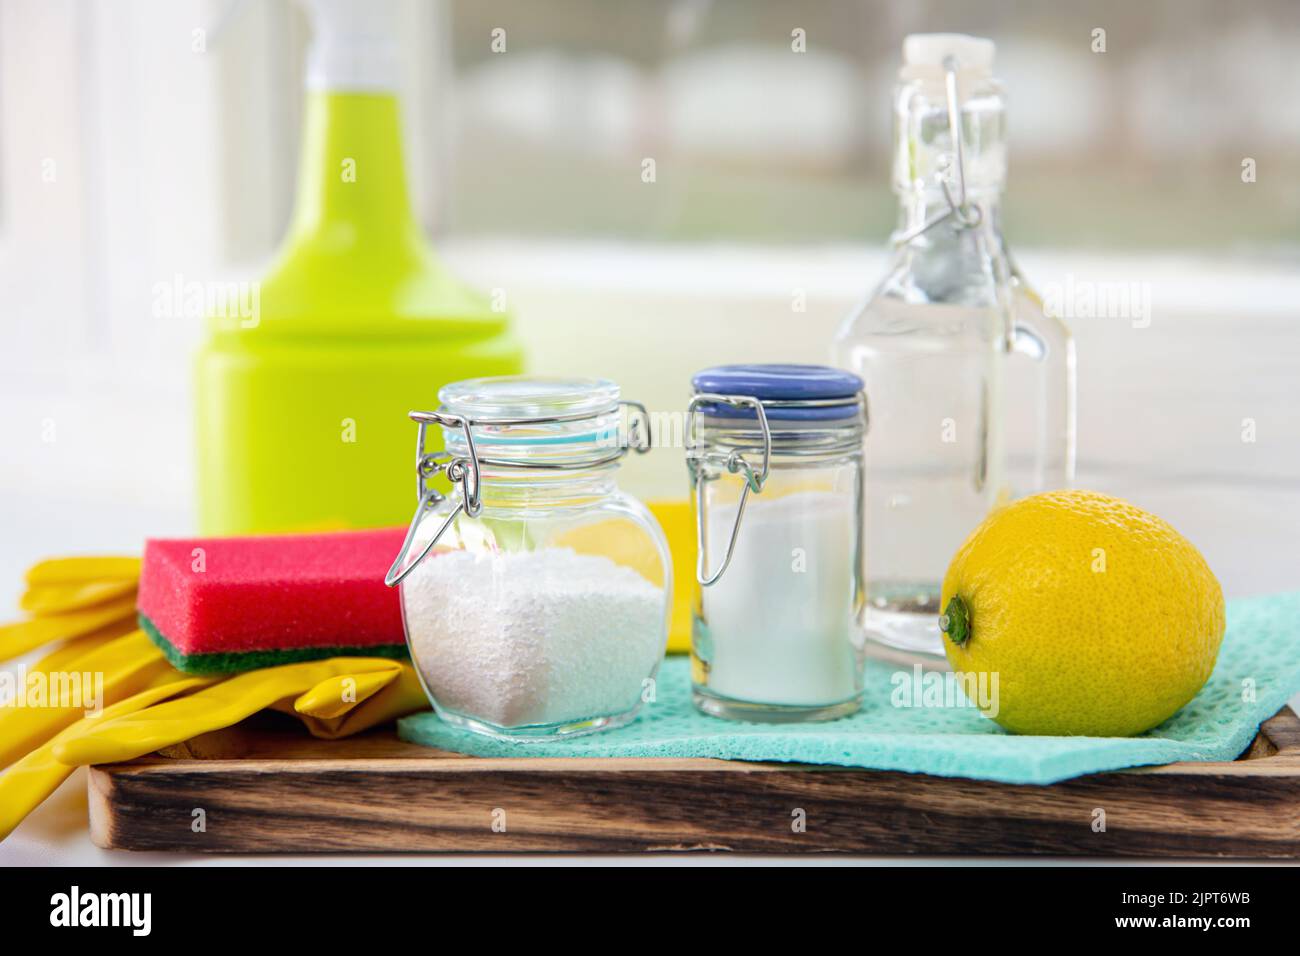 Natural organic eco friendly home cleaning tools ingredients, white vinegar, lemon, baking soda, citric acid on wood tray on window sill, window. Stock Photo